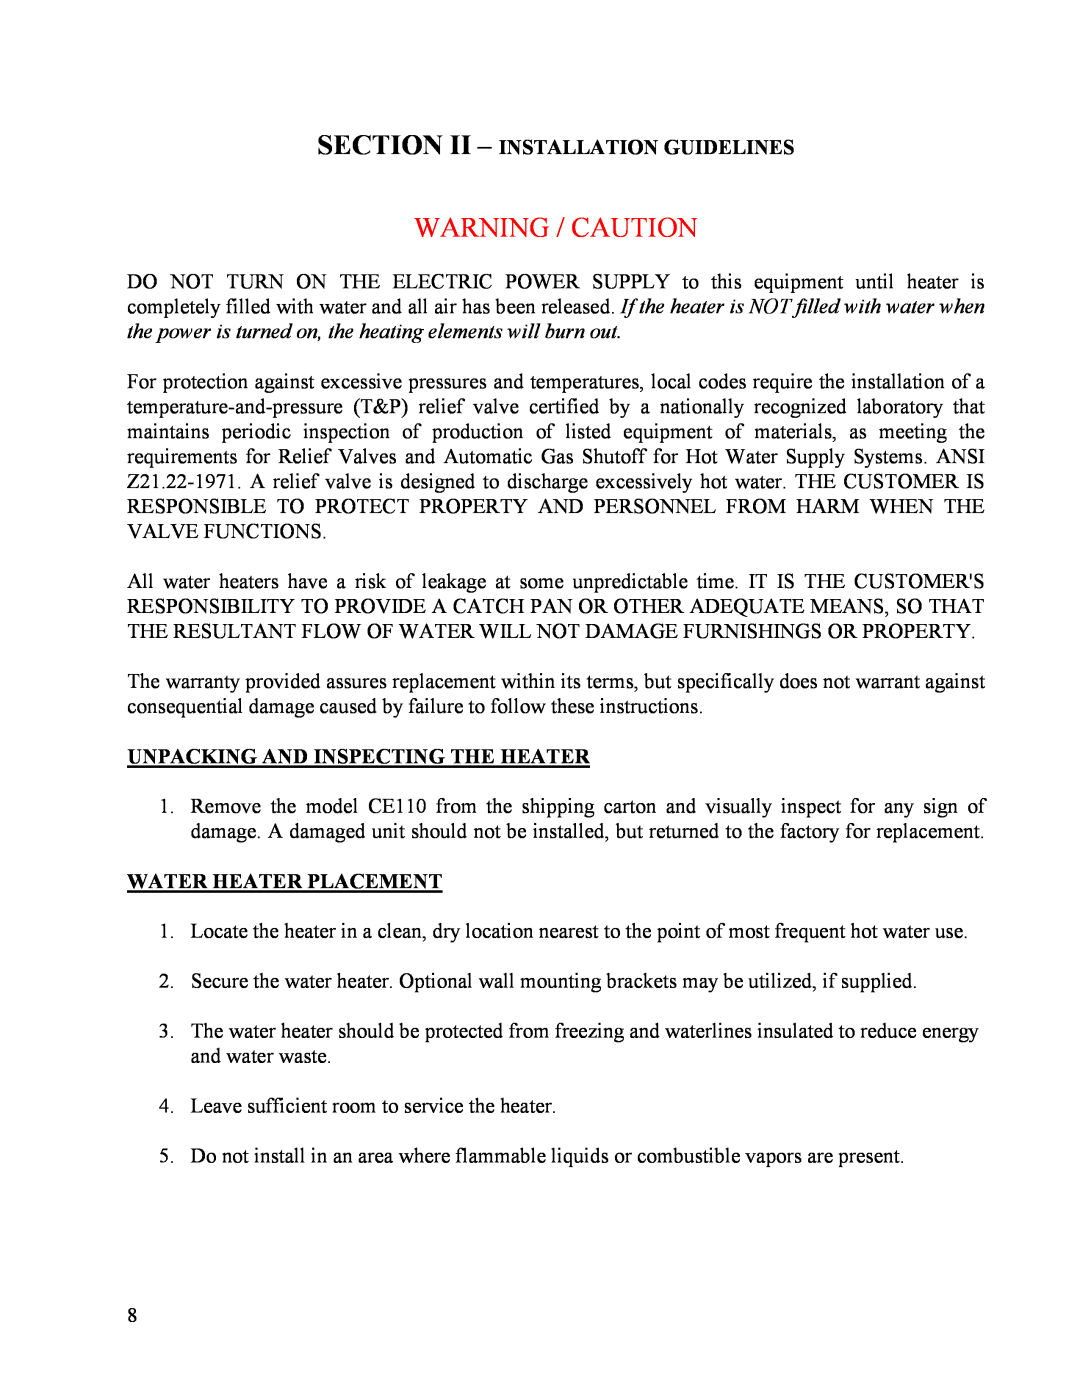 Hubbell Electric Heater Company CE110 Warning / Caution, Section Ii - Installation Guidelines, Water Heater Placement 